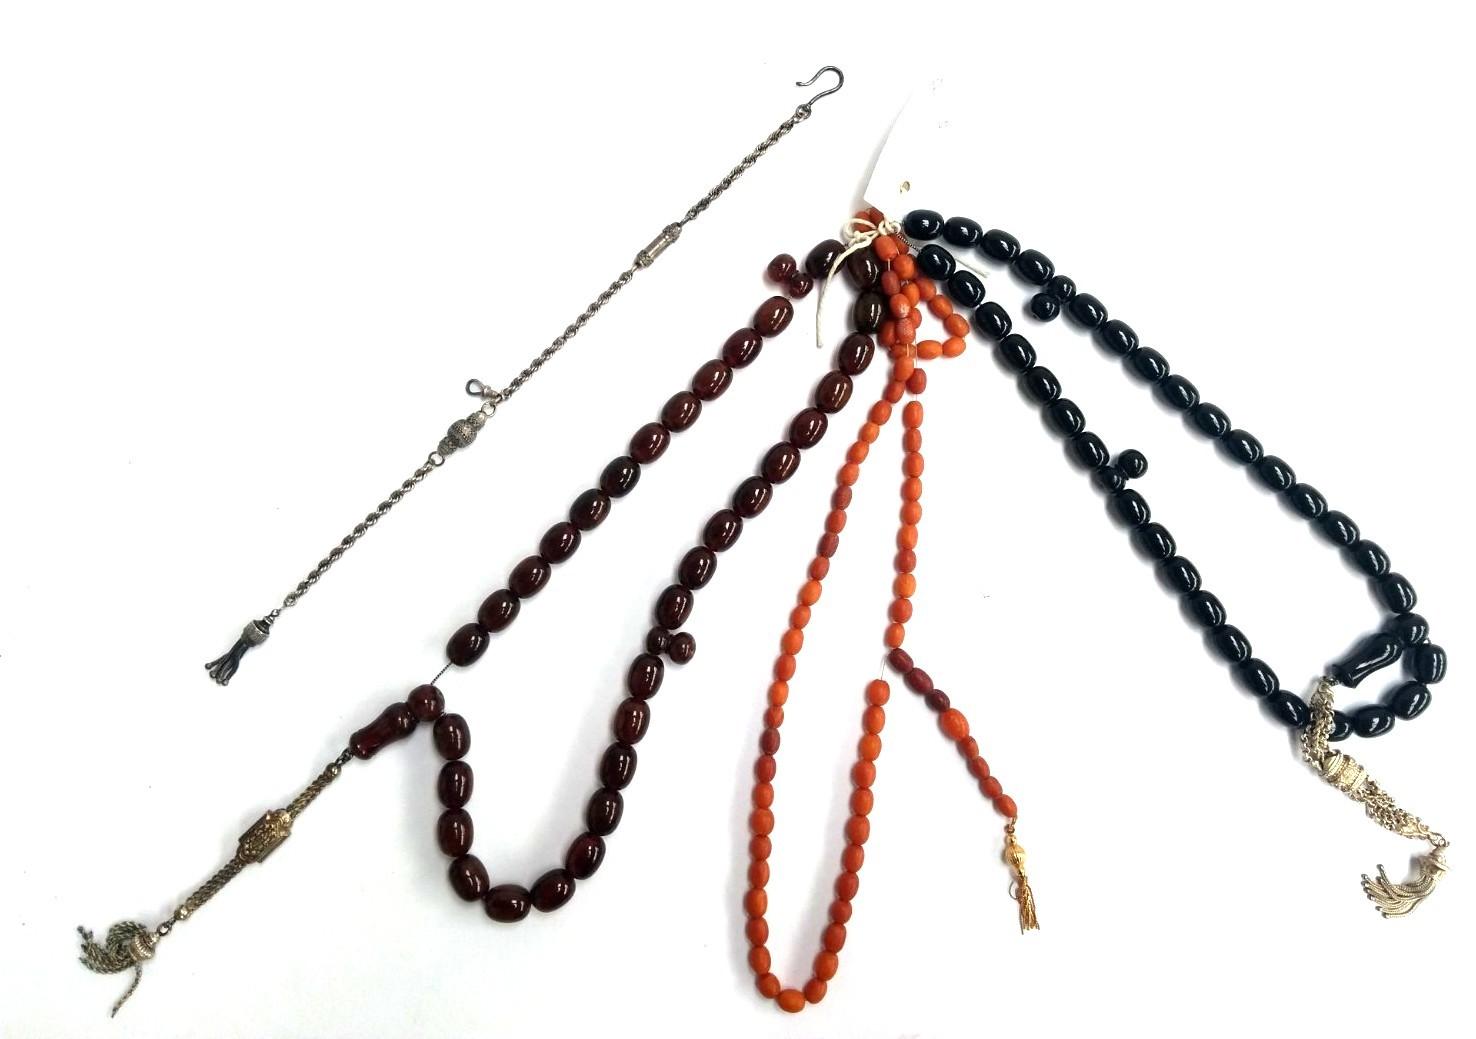 Beads with gold tassel marked 375 UnoAerre plus two other sets of beads with white metal tassels and